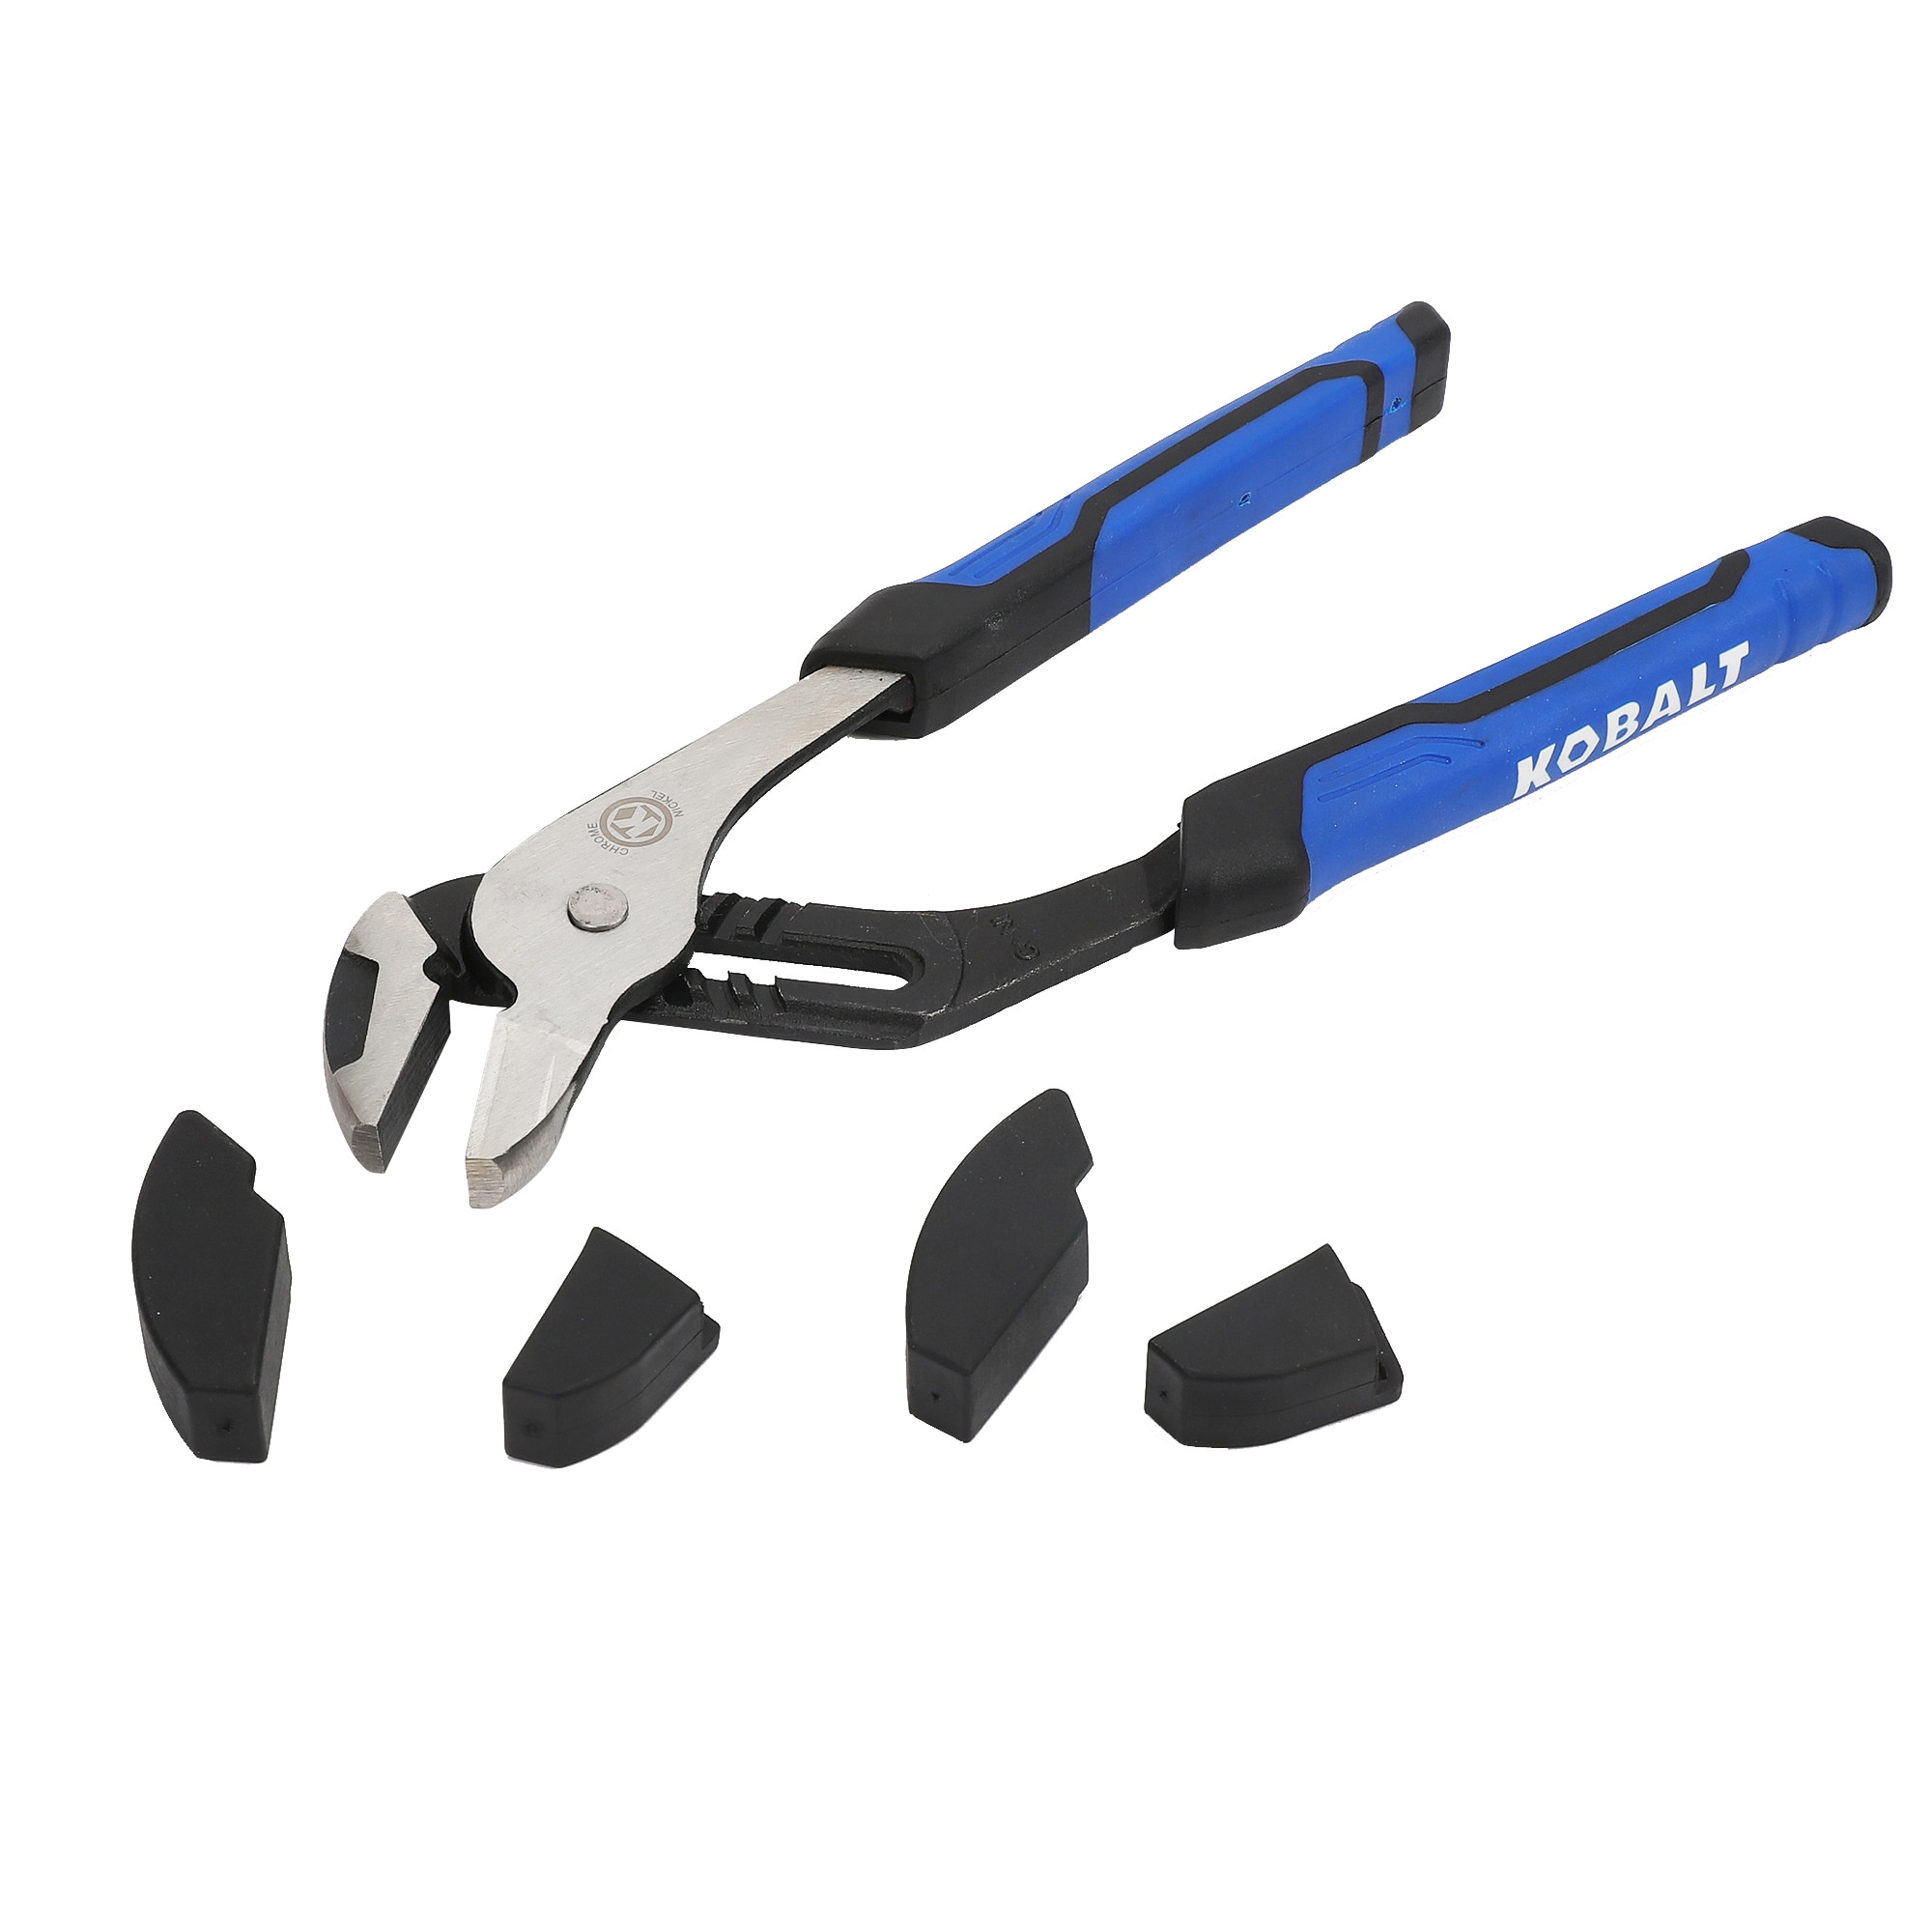 SOFT JAW PLIER 3/4 - 2-1/2 GRIP RANGE - Connector Backshell Tooling -  Industrial Tools